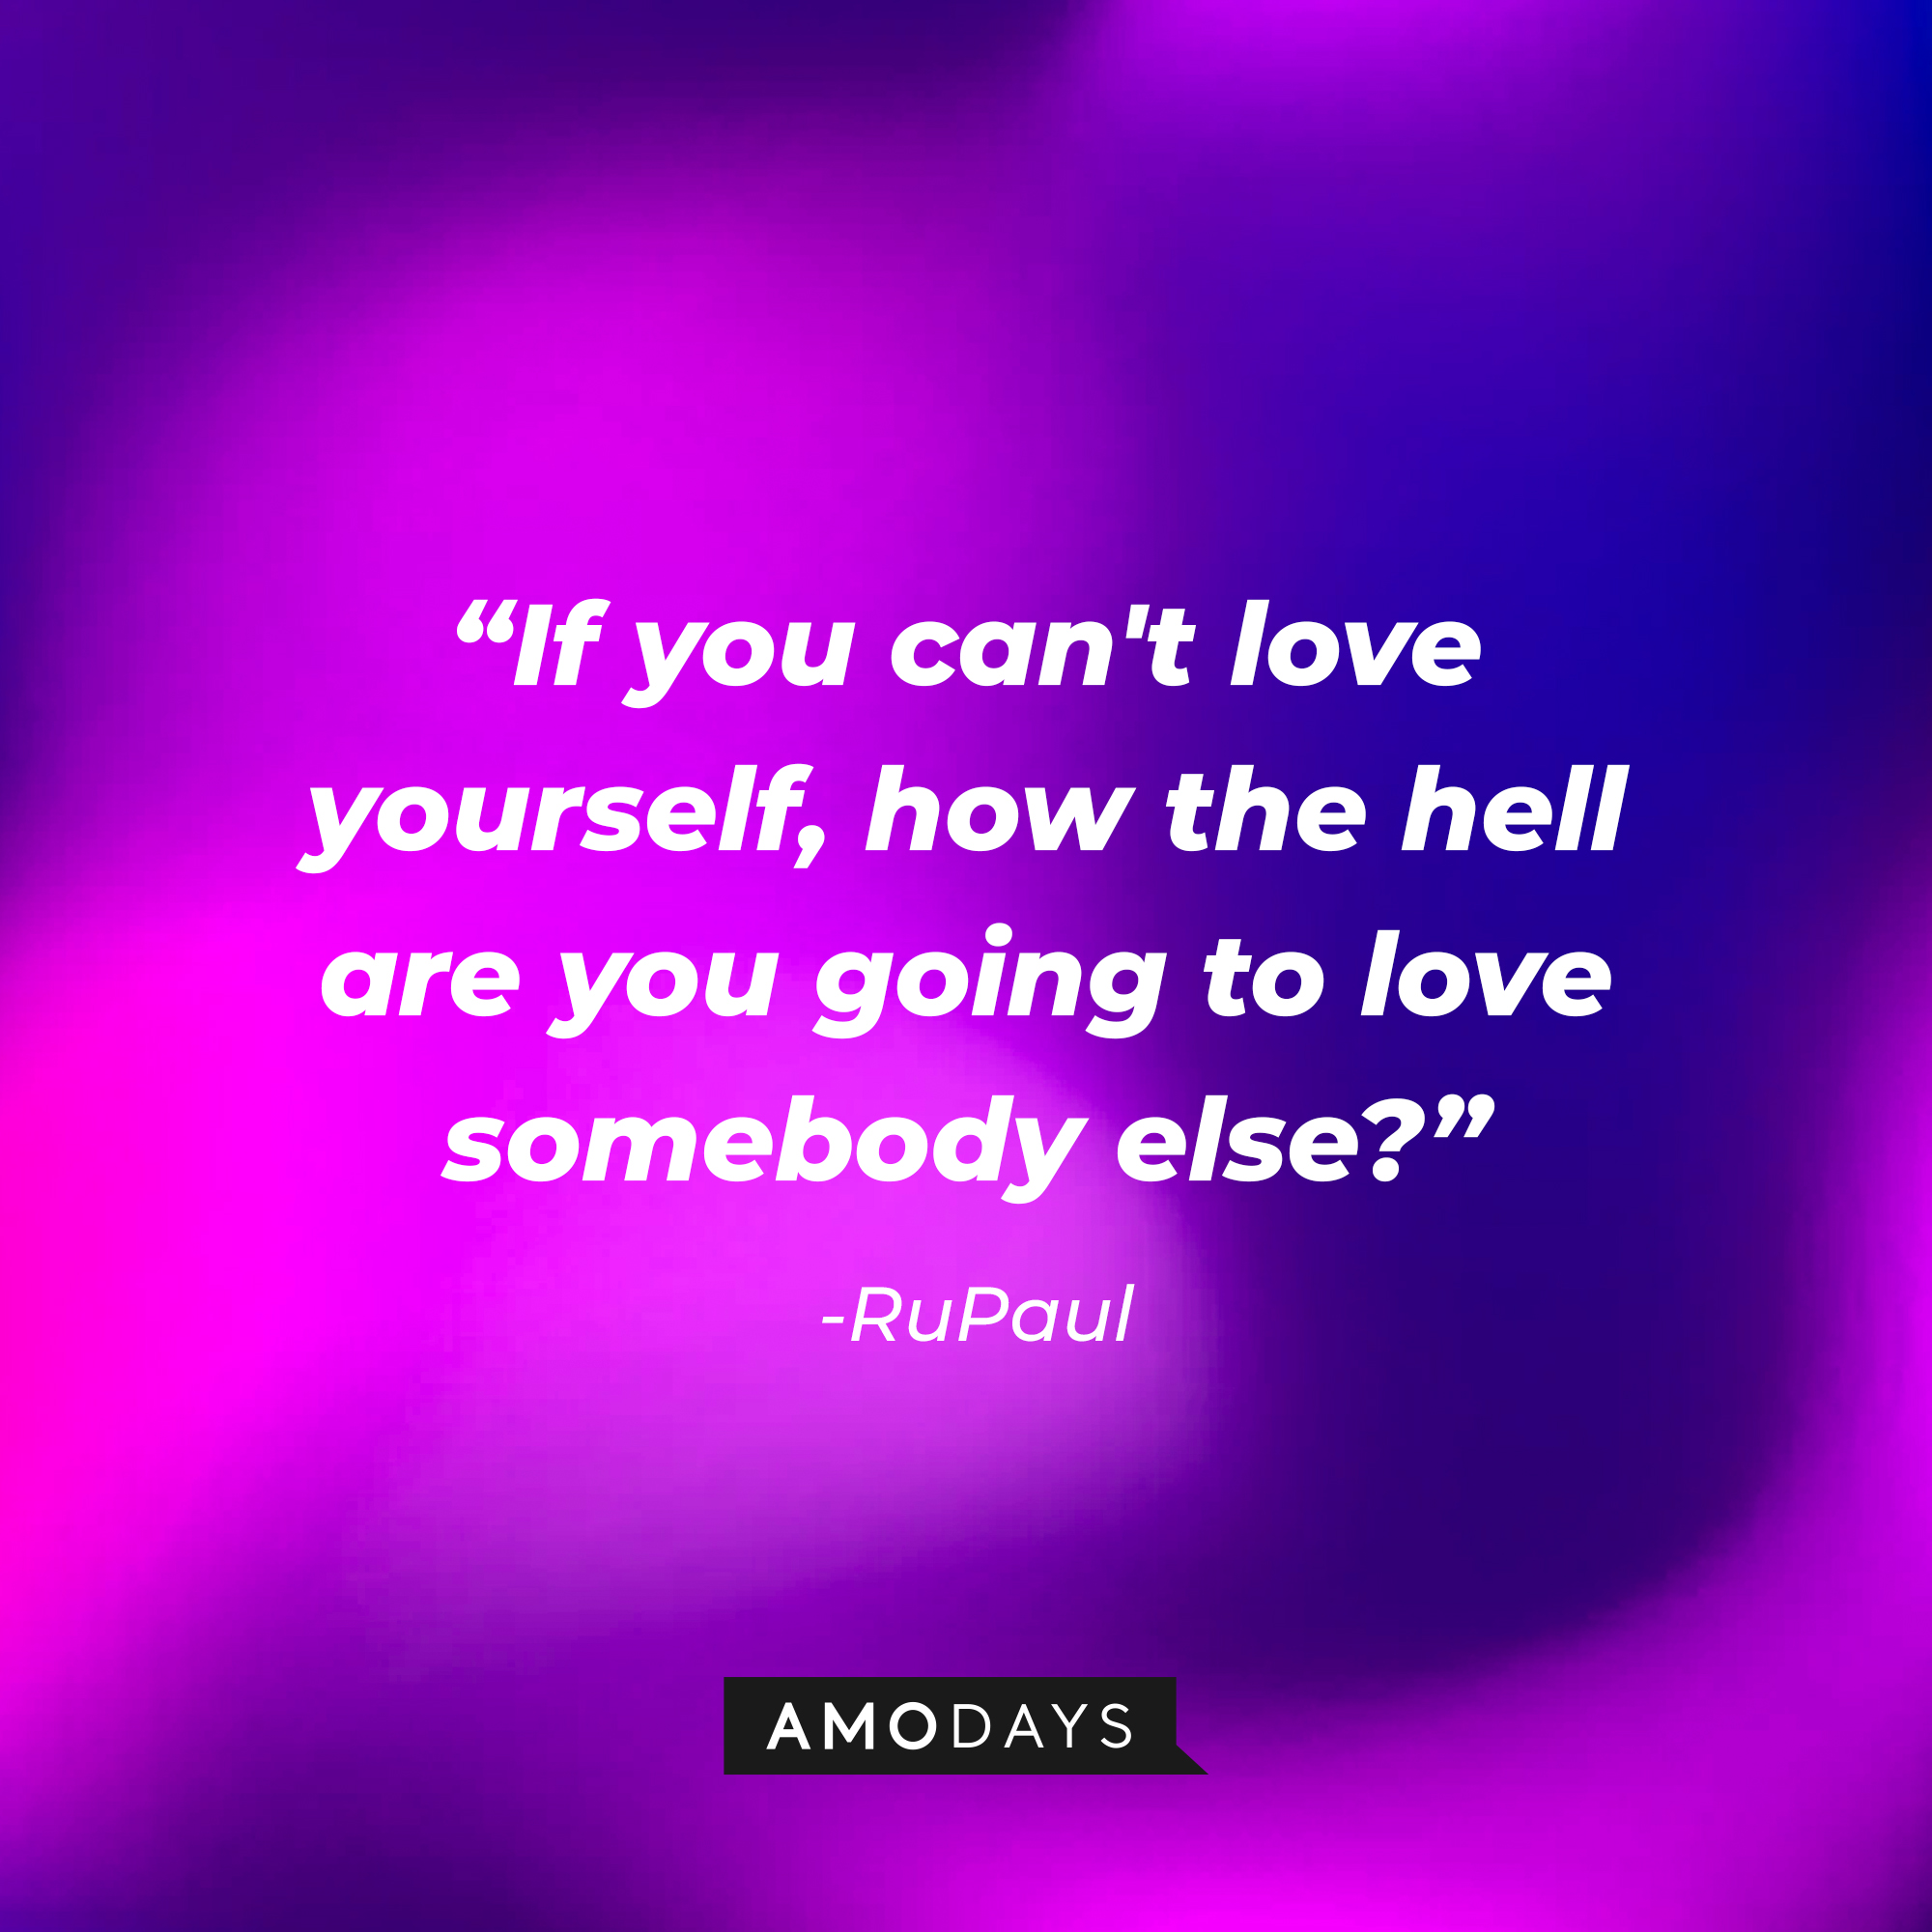 RuPaul's quote: "If you can't love yourself, how the hell are you going to love somebody else?” |  Source: AmoDays